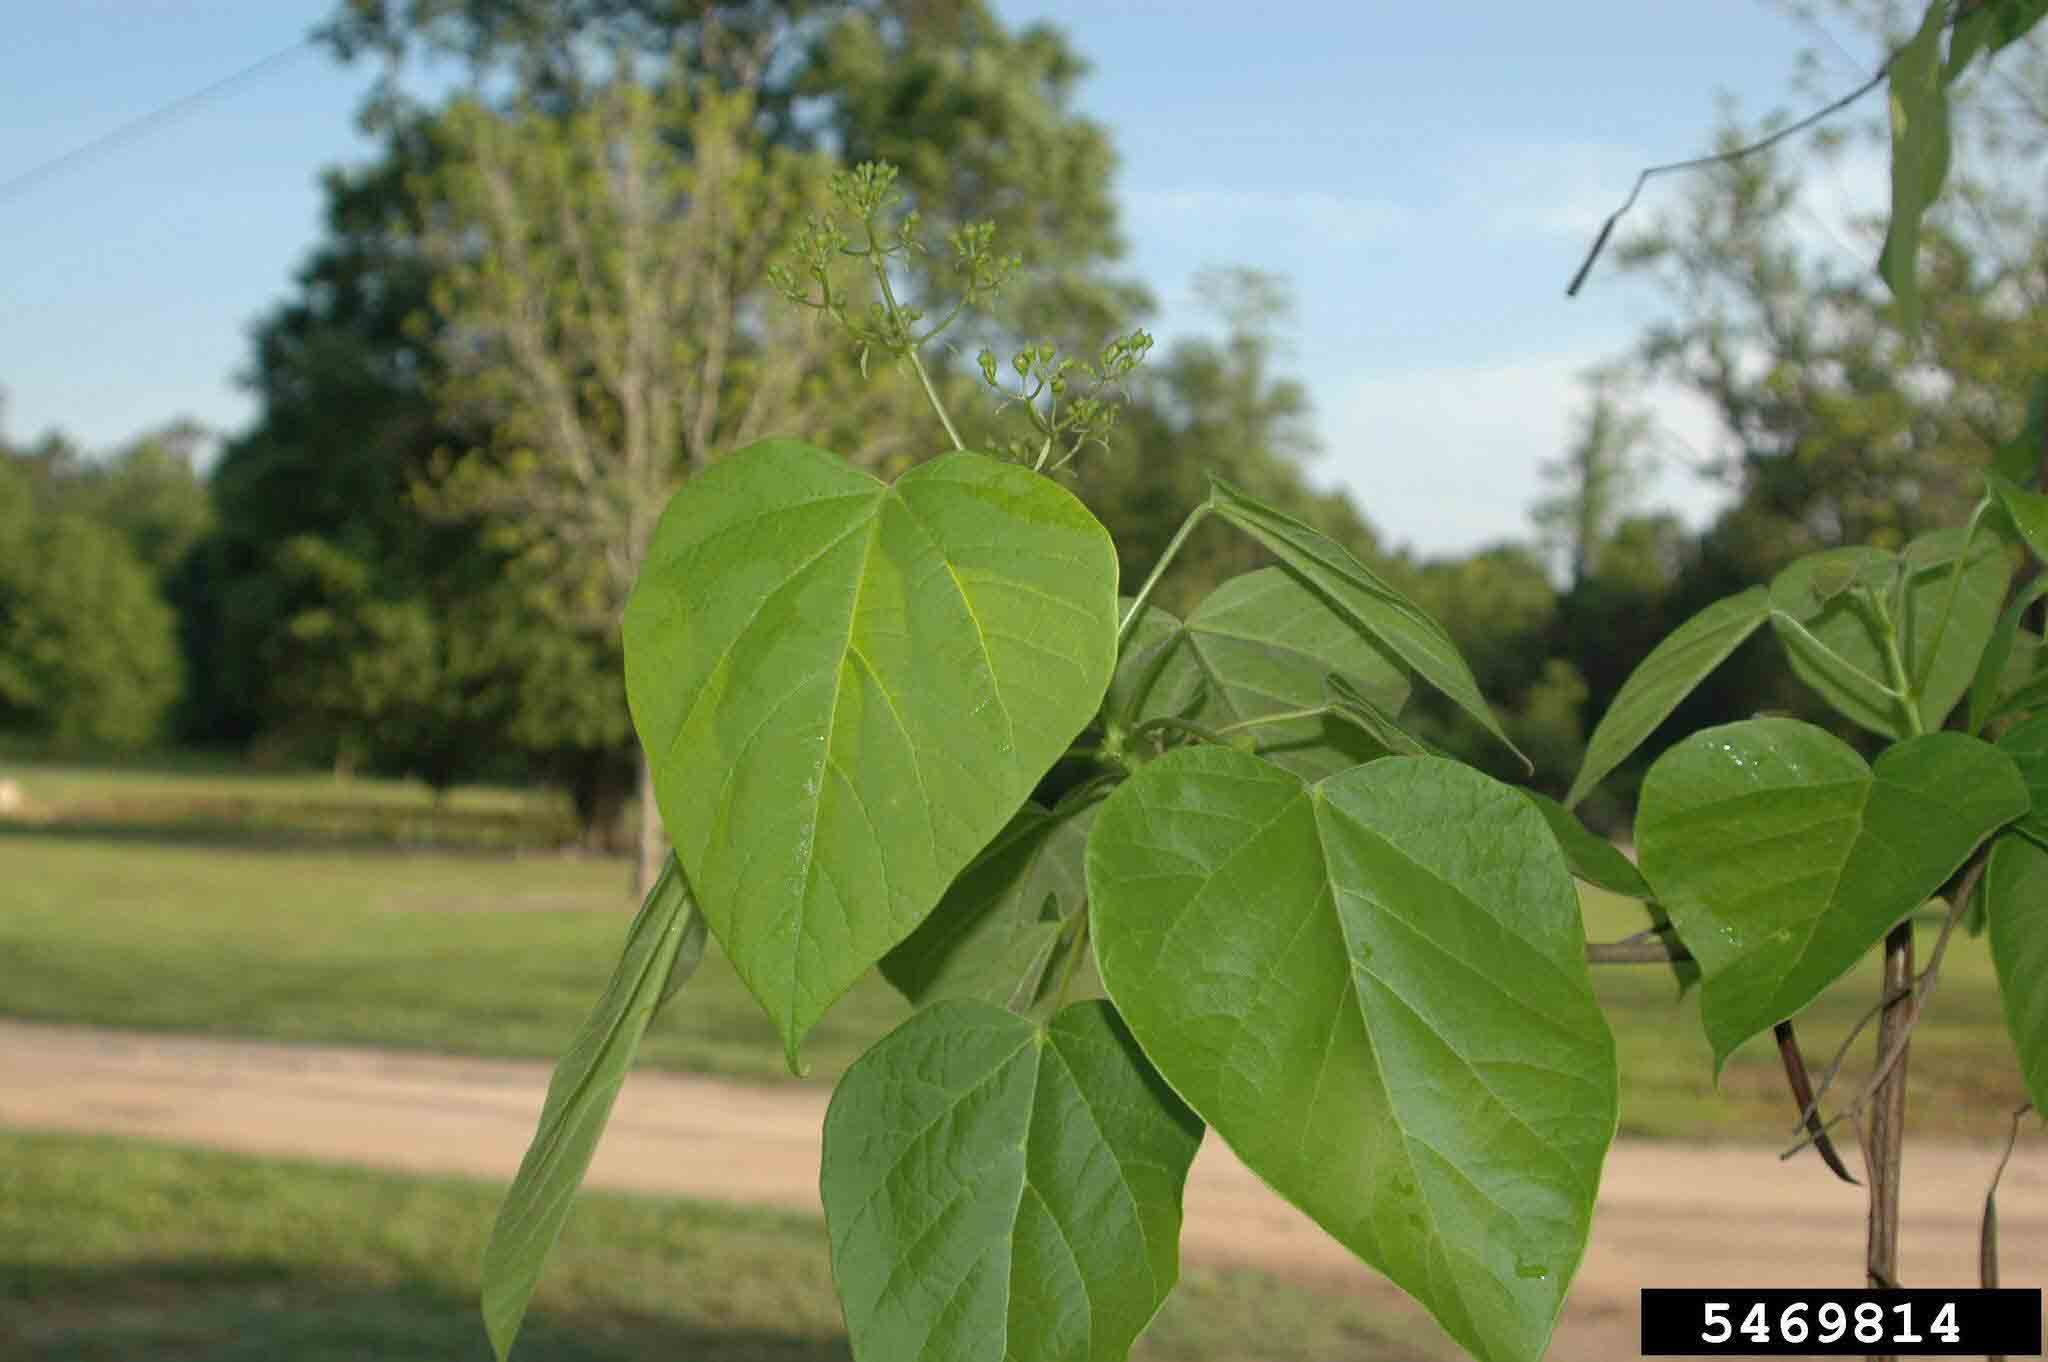 Southern catalpa leaves with flower panicle in bud